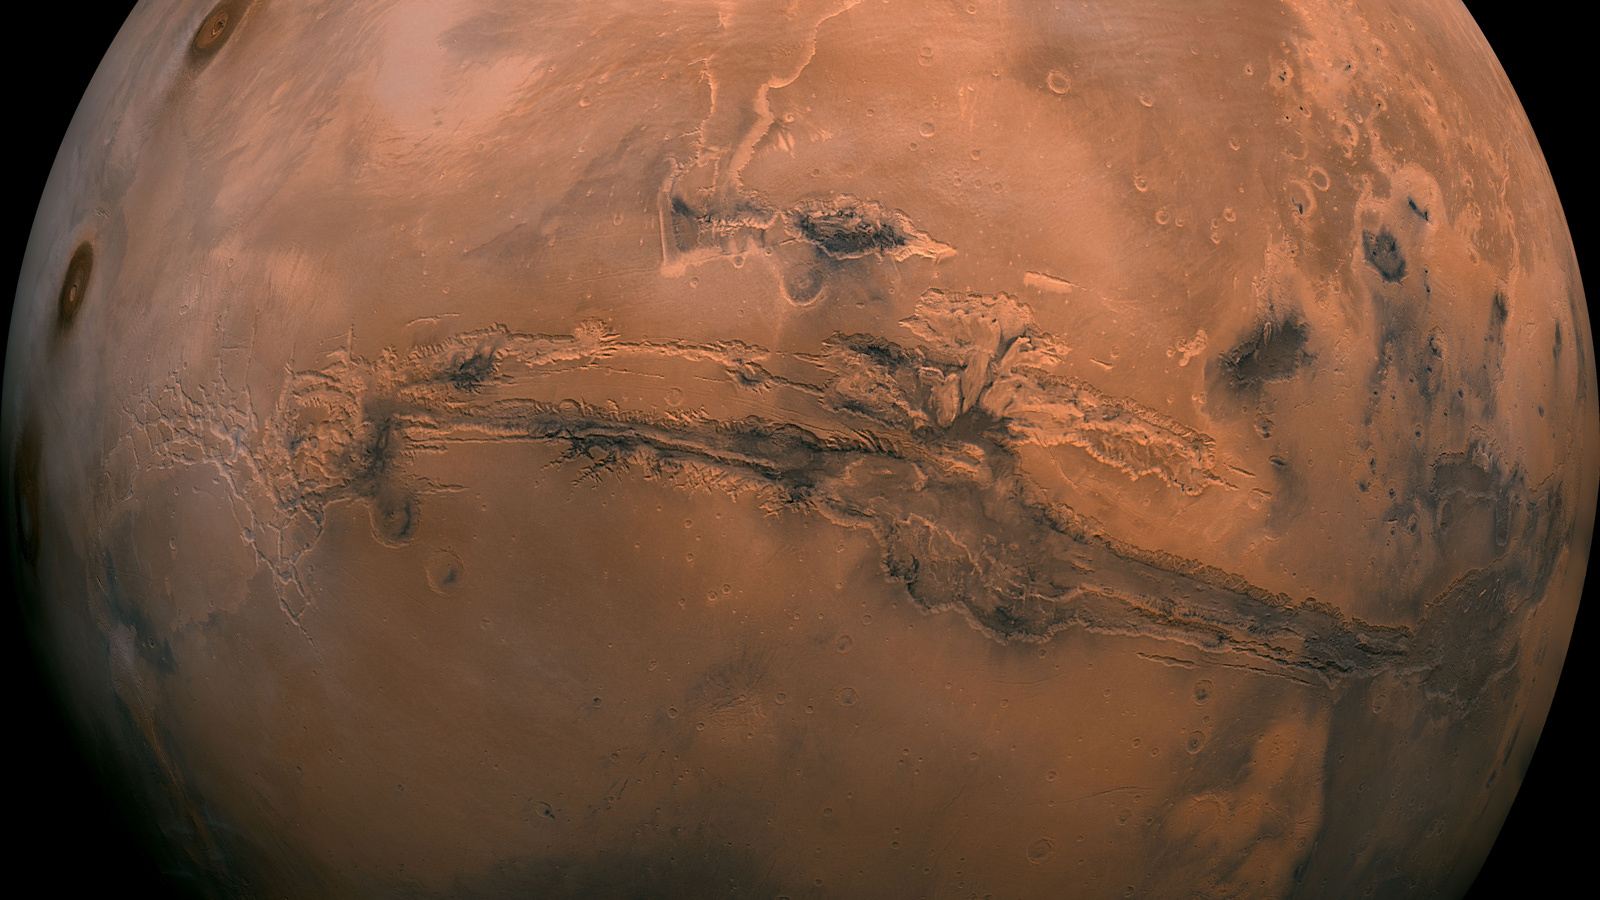 This mosaic of Mars is a compilation of images captured by NASA's Viking Orbiter 1. The center of the scene shows the entire Valles Marineris canyon system, over 3,000 km long and up to 8 km deep, extending from Noctis Labyrinthus.